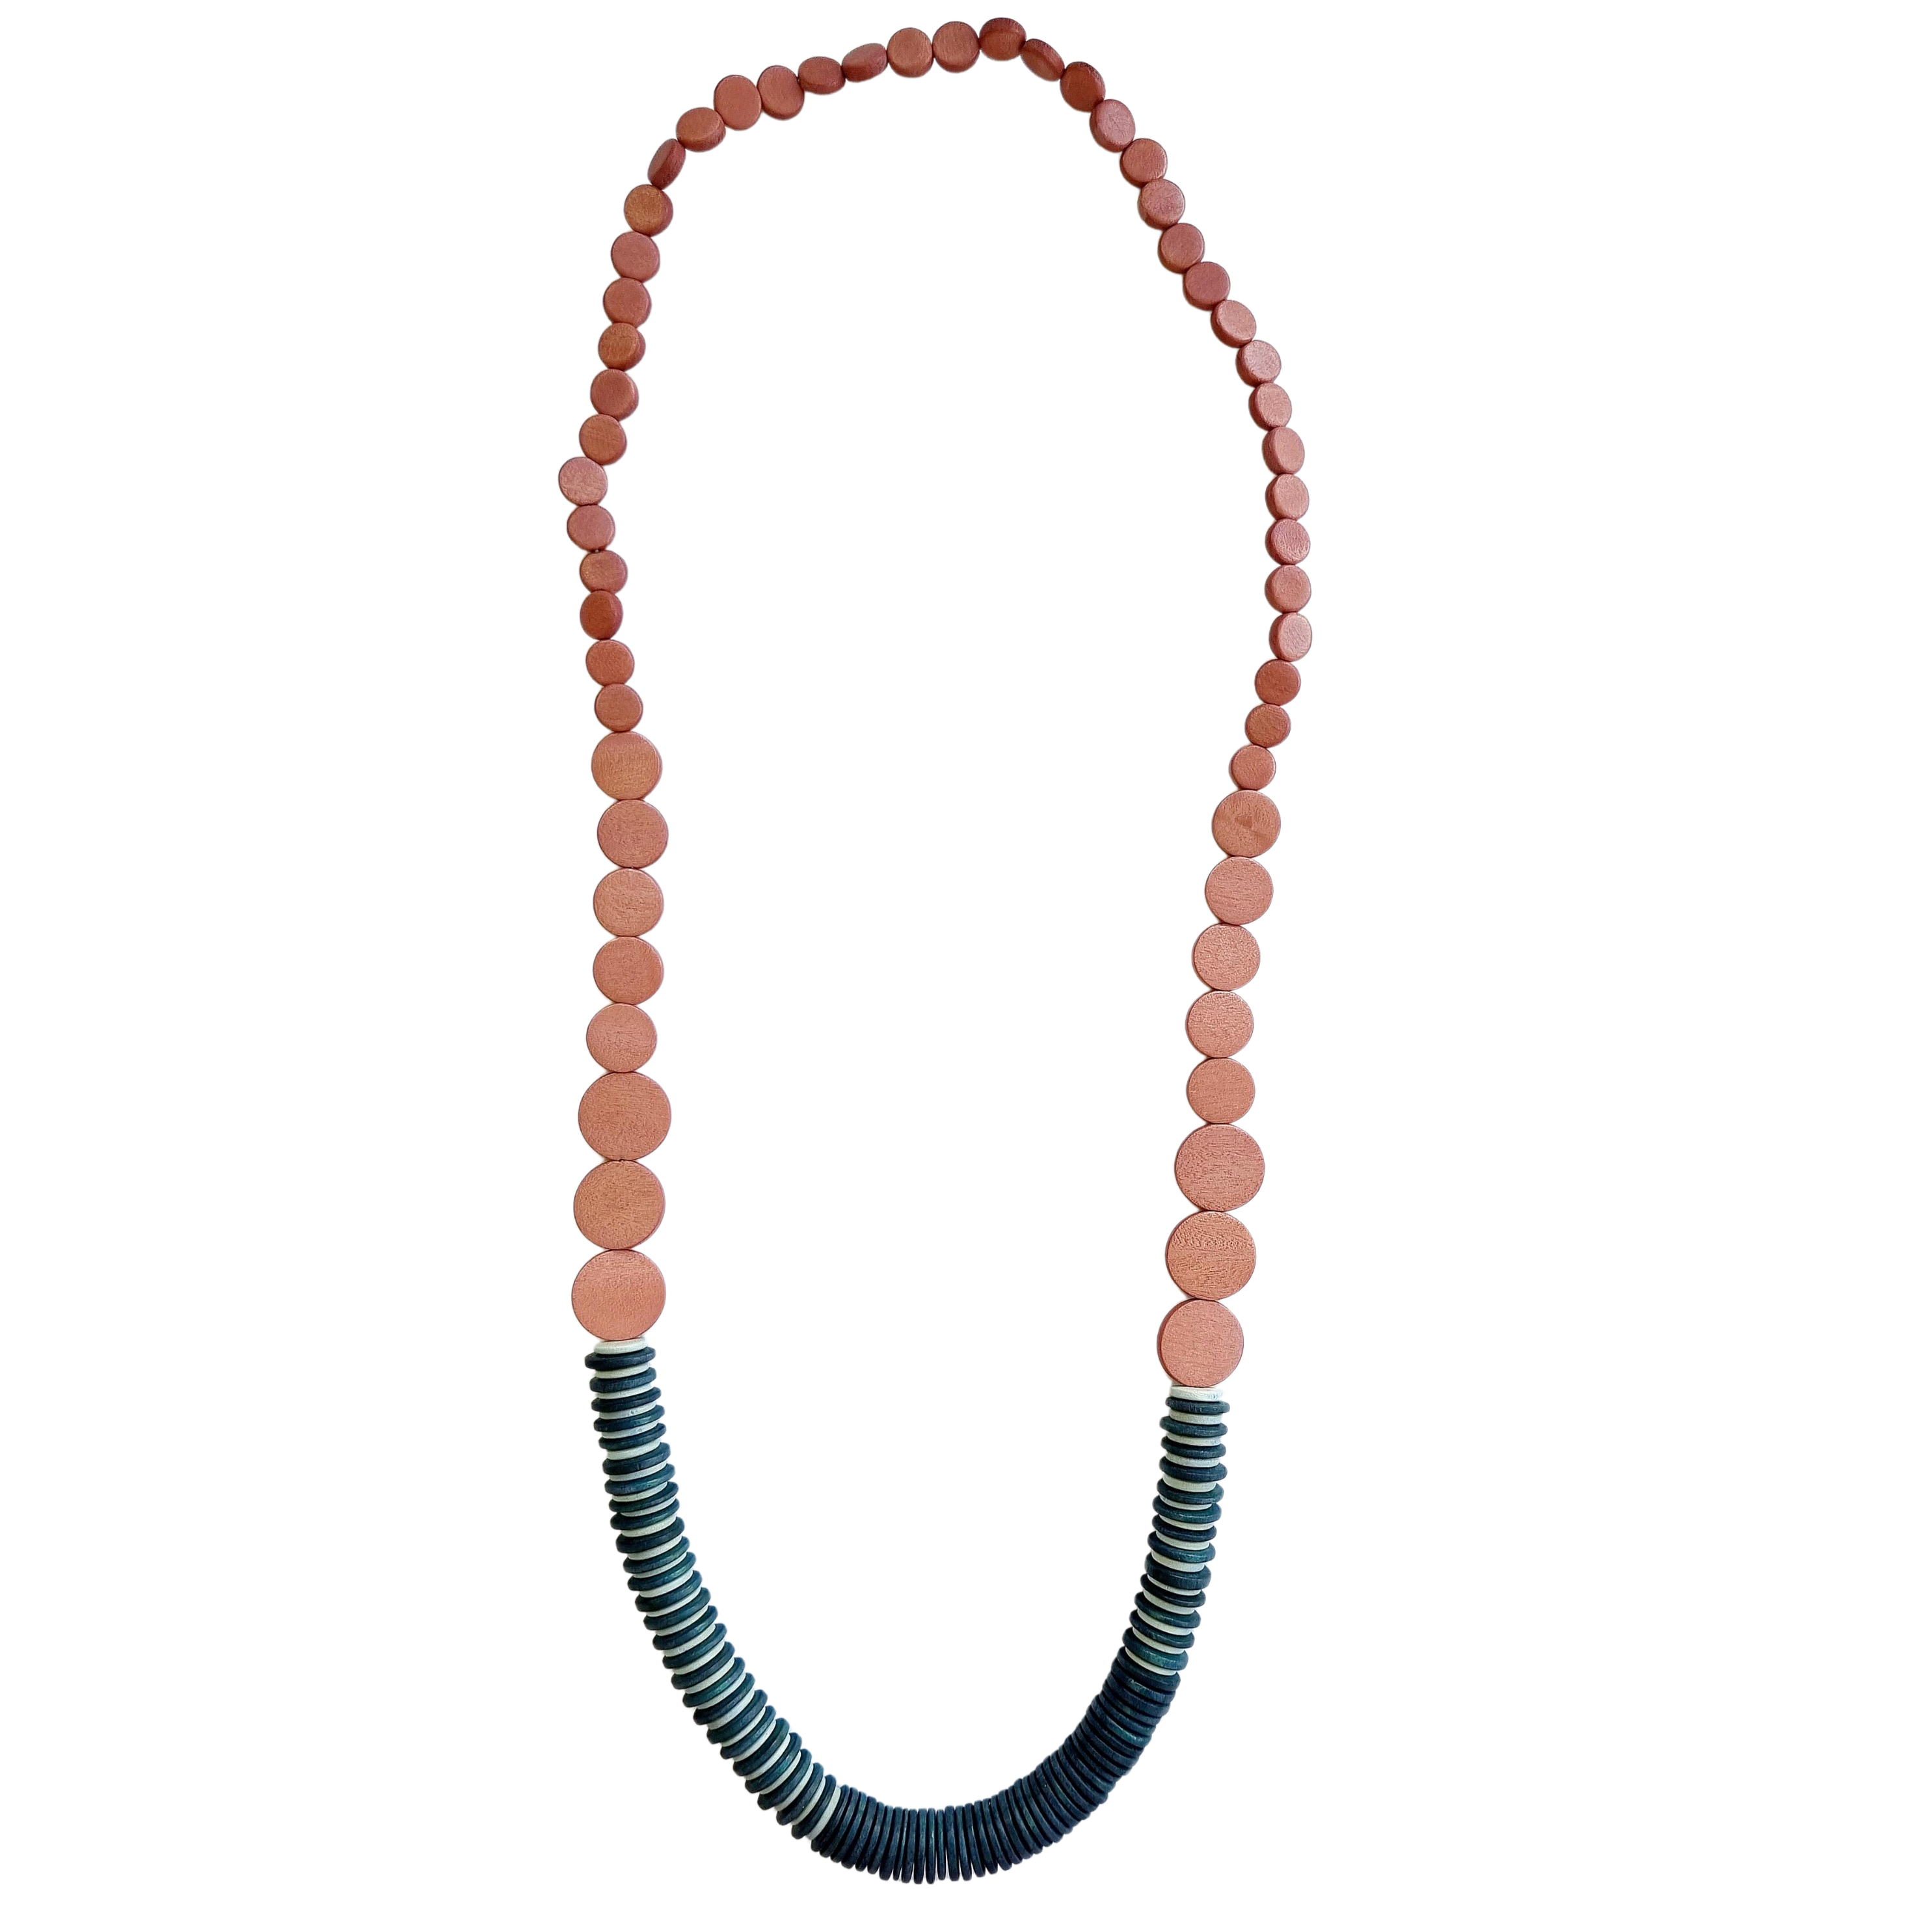 Laroda Wooden Necklace Dusty Pink Teal